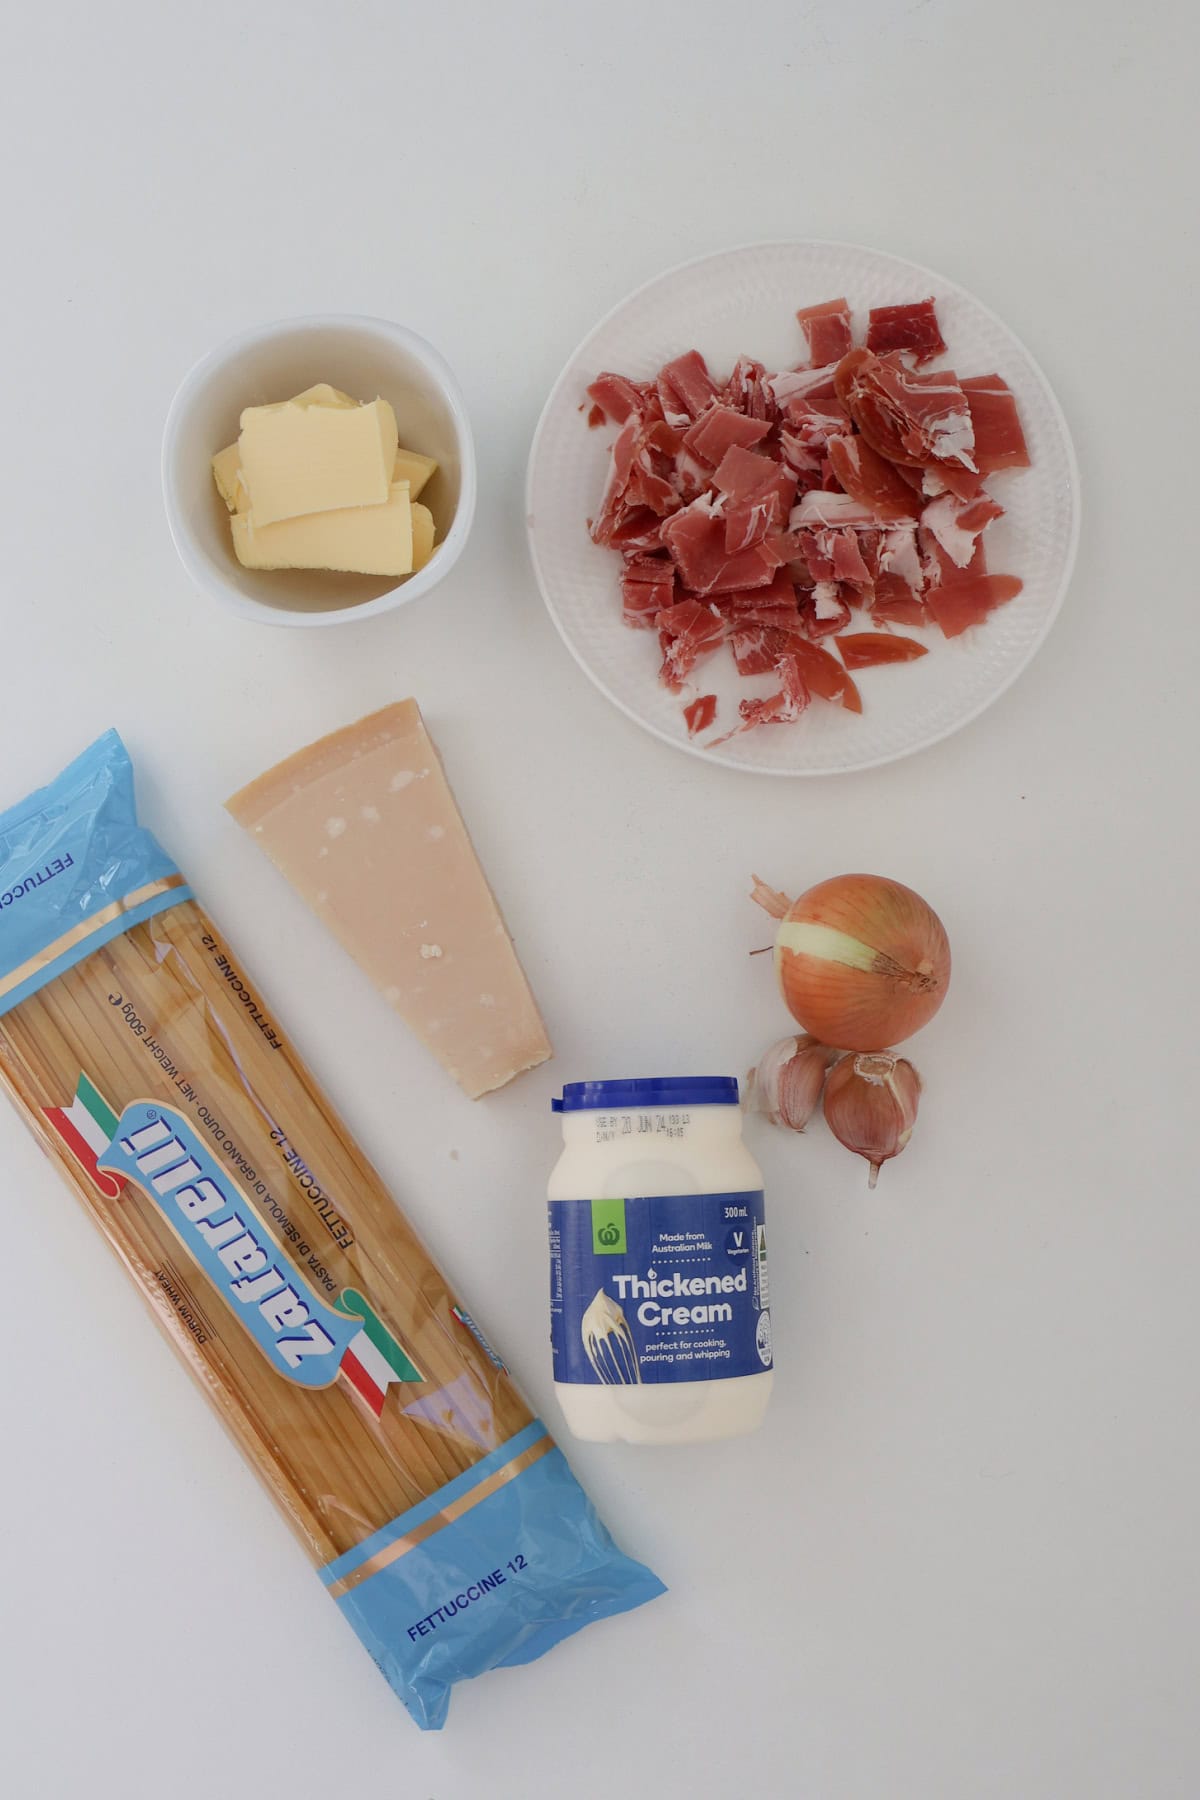 Ingredients to make carbonara in a thermomix.